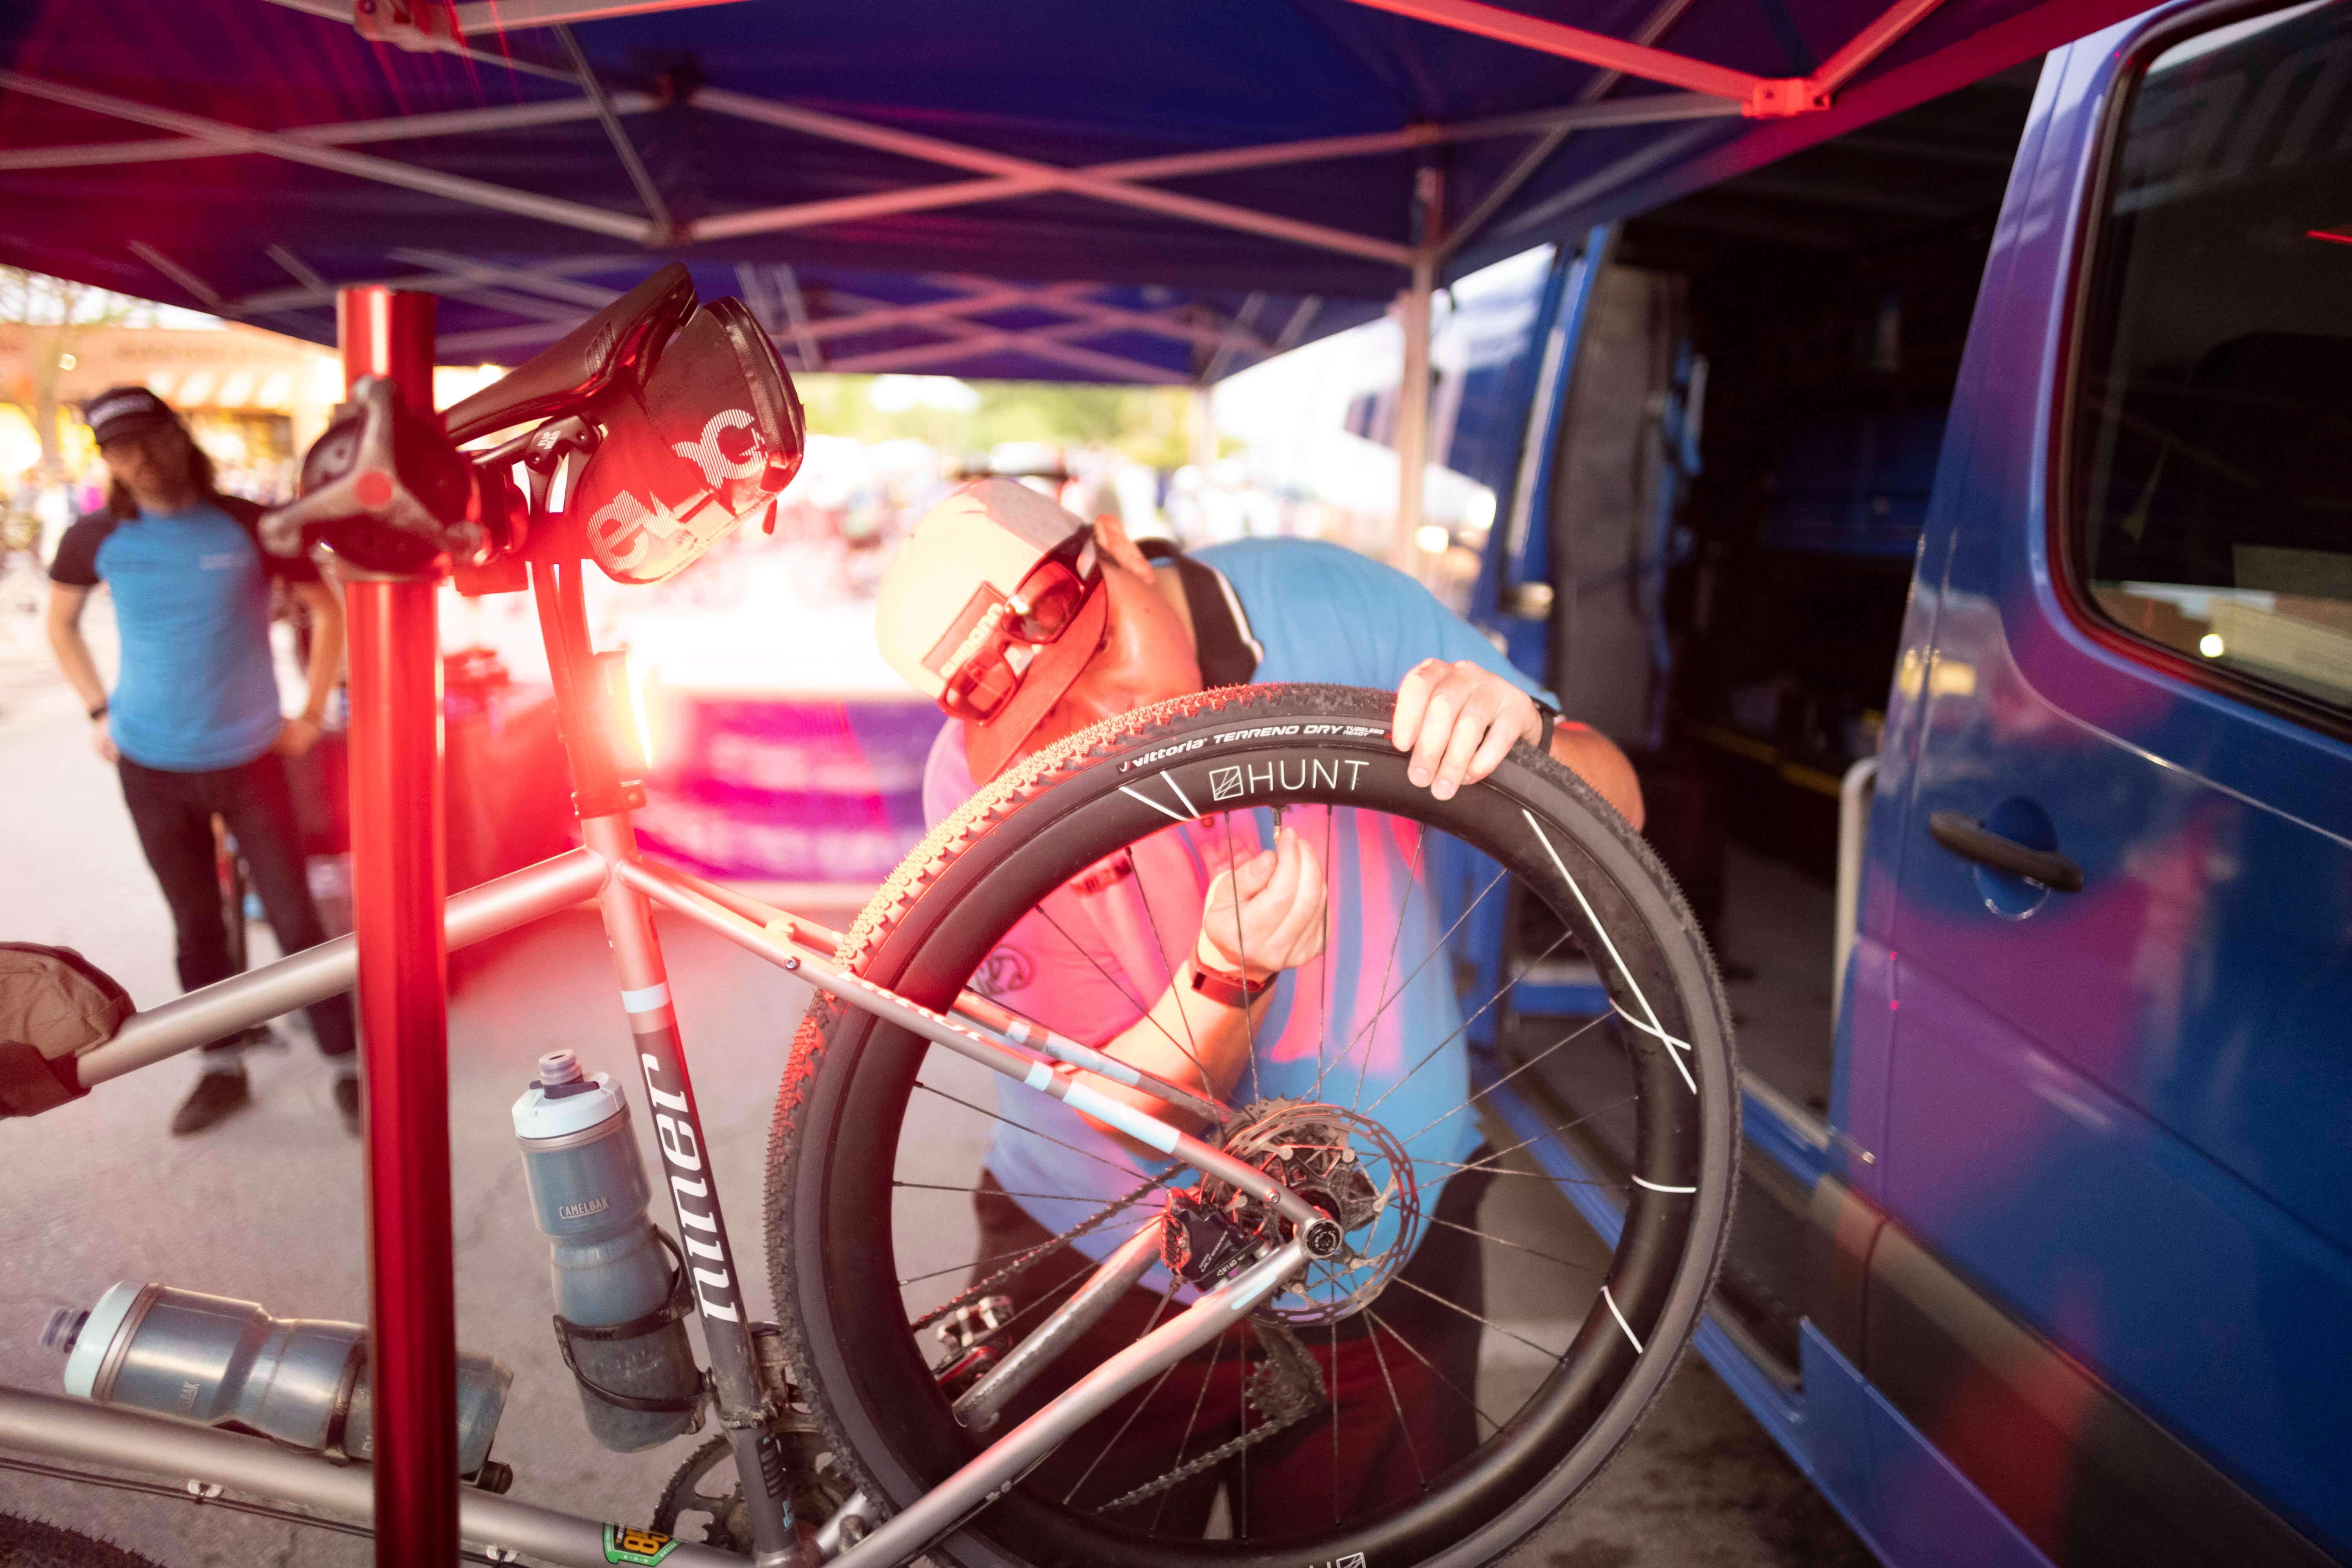 Shimano Multi Service fixing a racers bike at Unbound gravel race